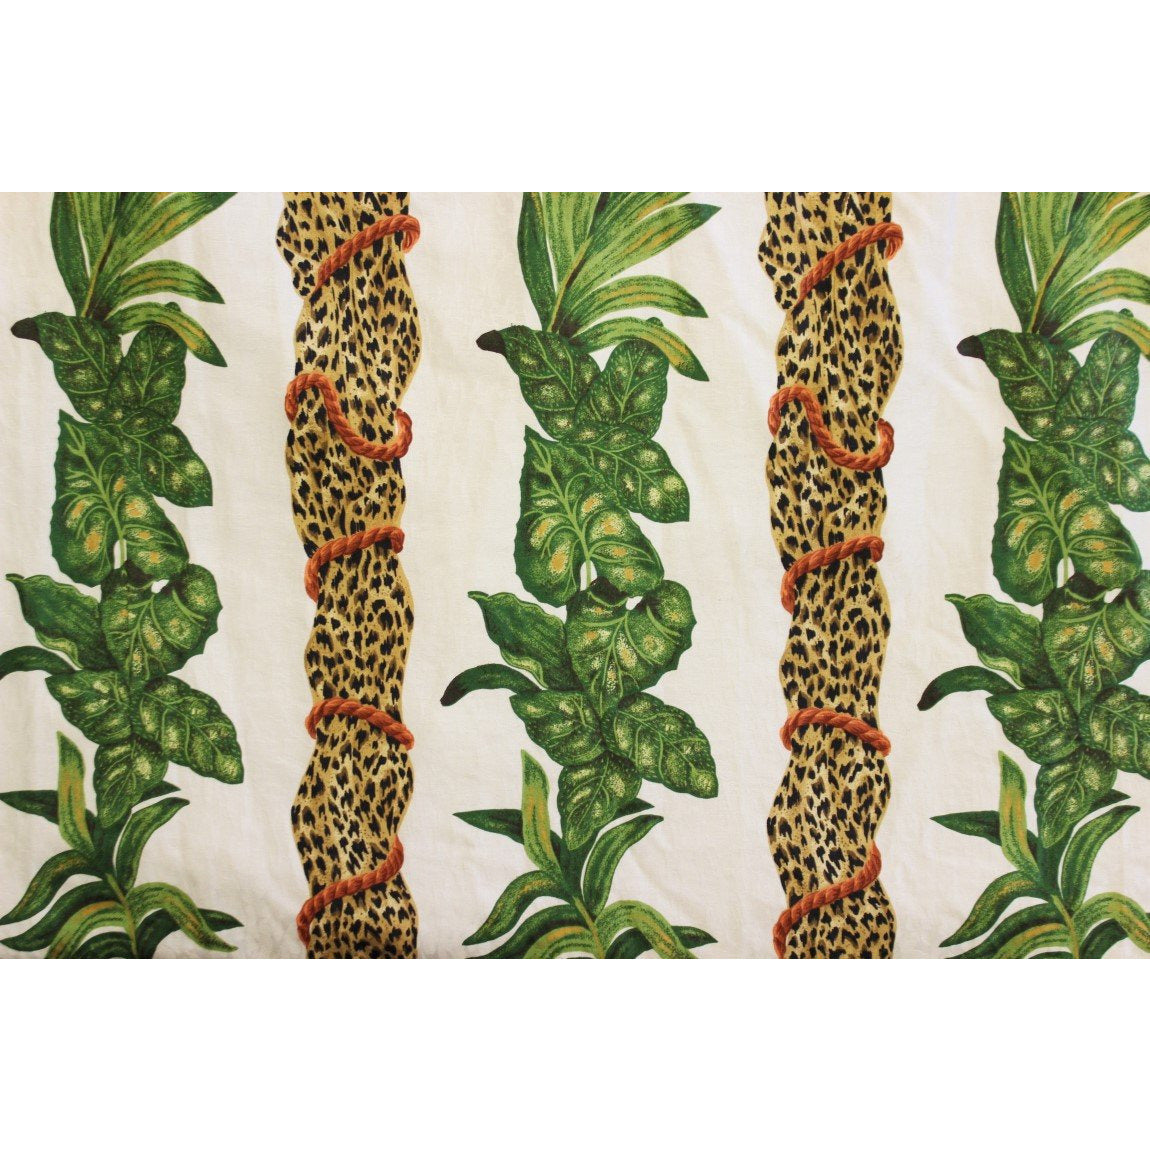 Two Large Curtain Panels w/ Pinch Pleats; Leopard Print & Jungle Leaves Curtain Panels